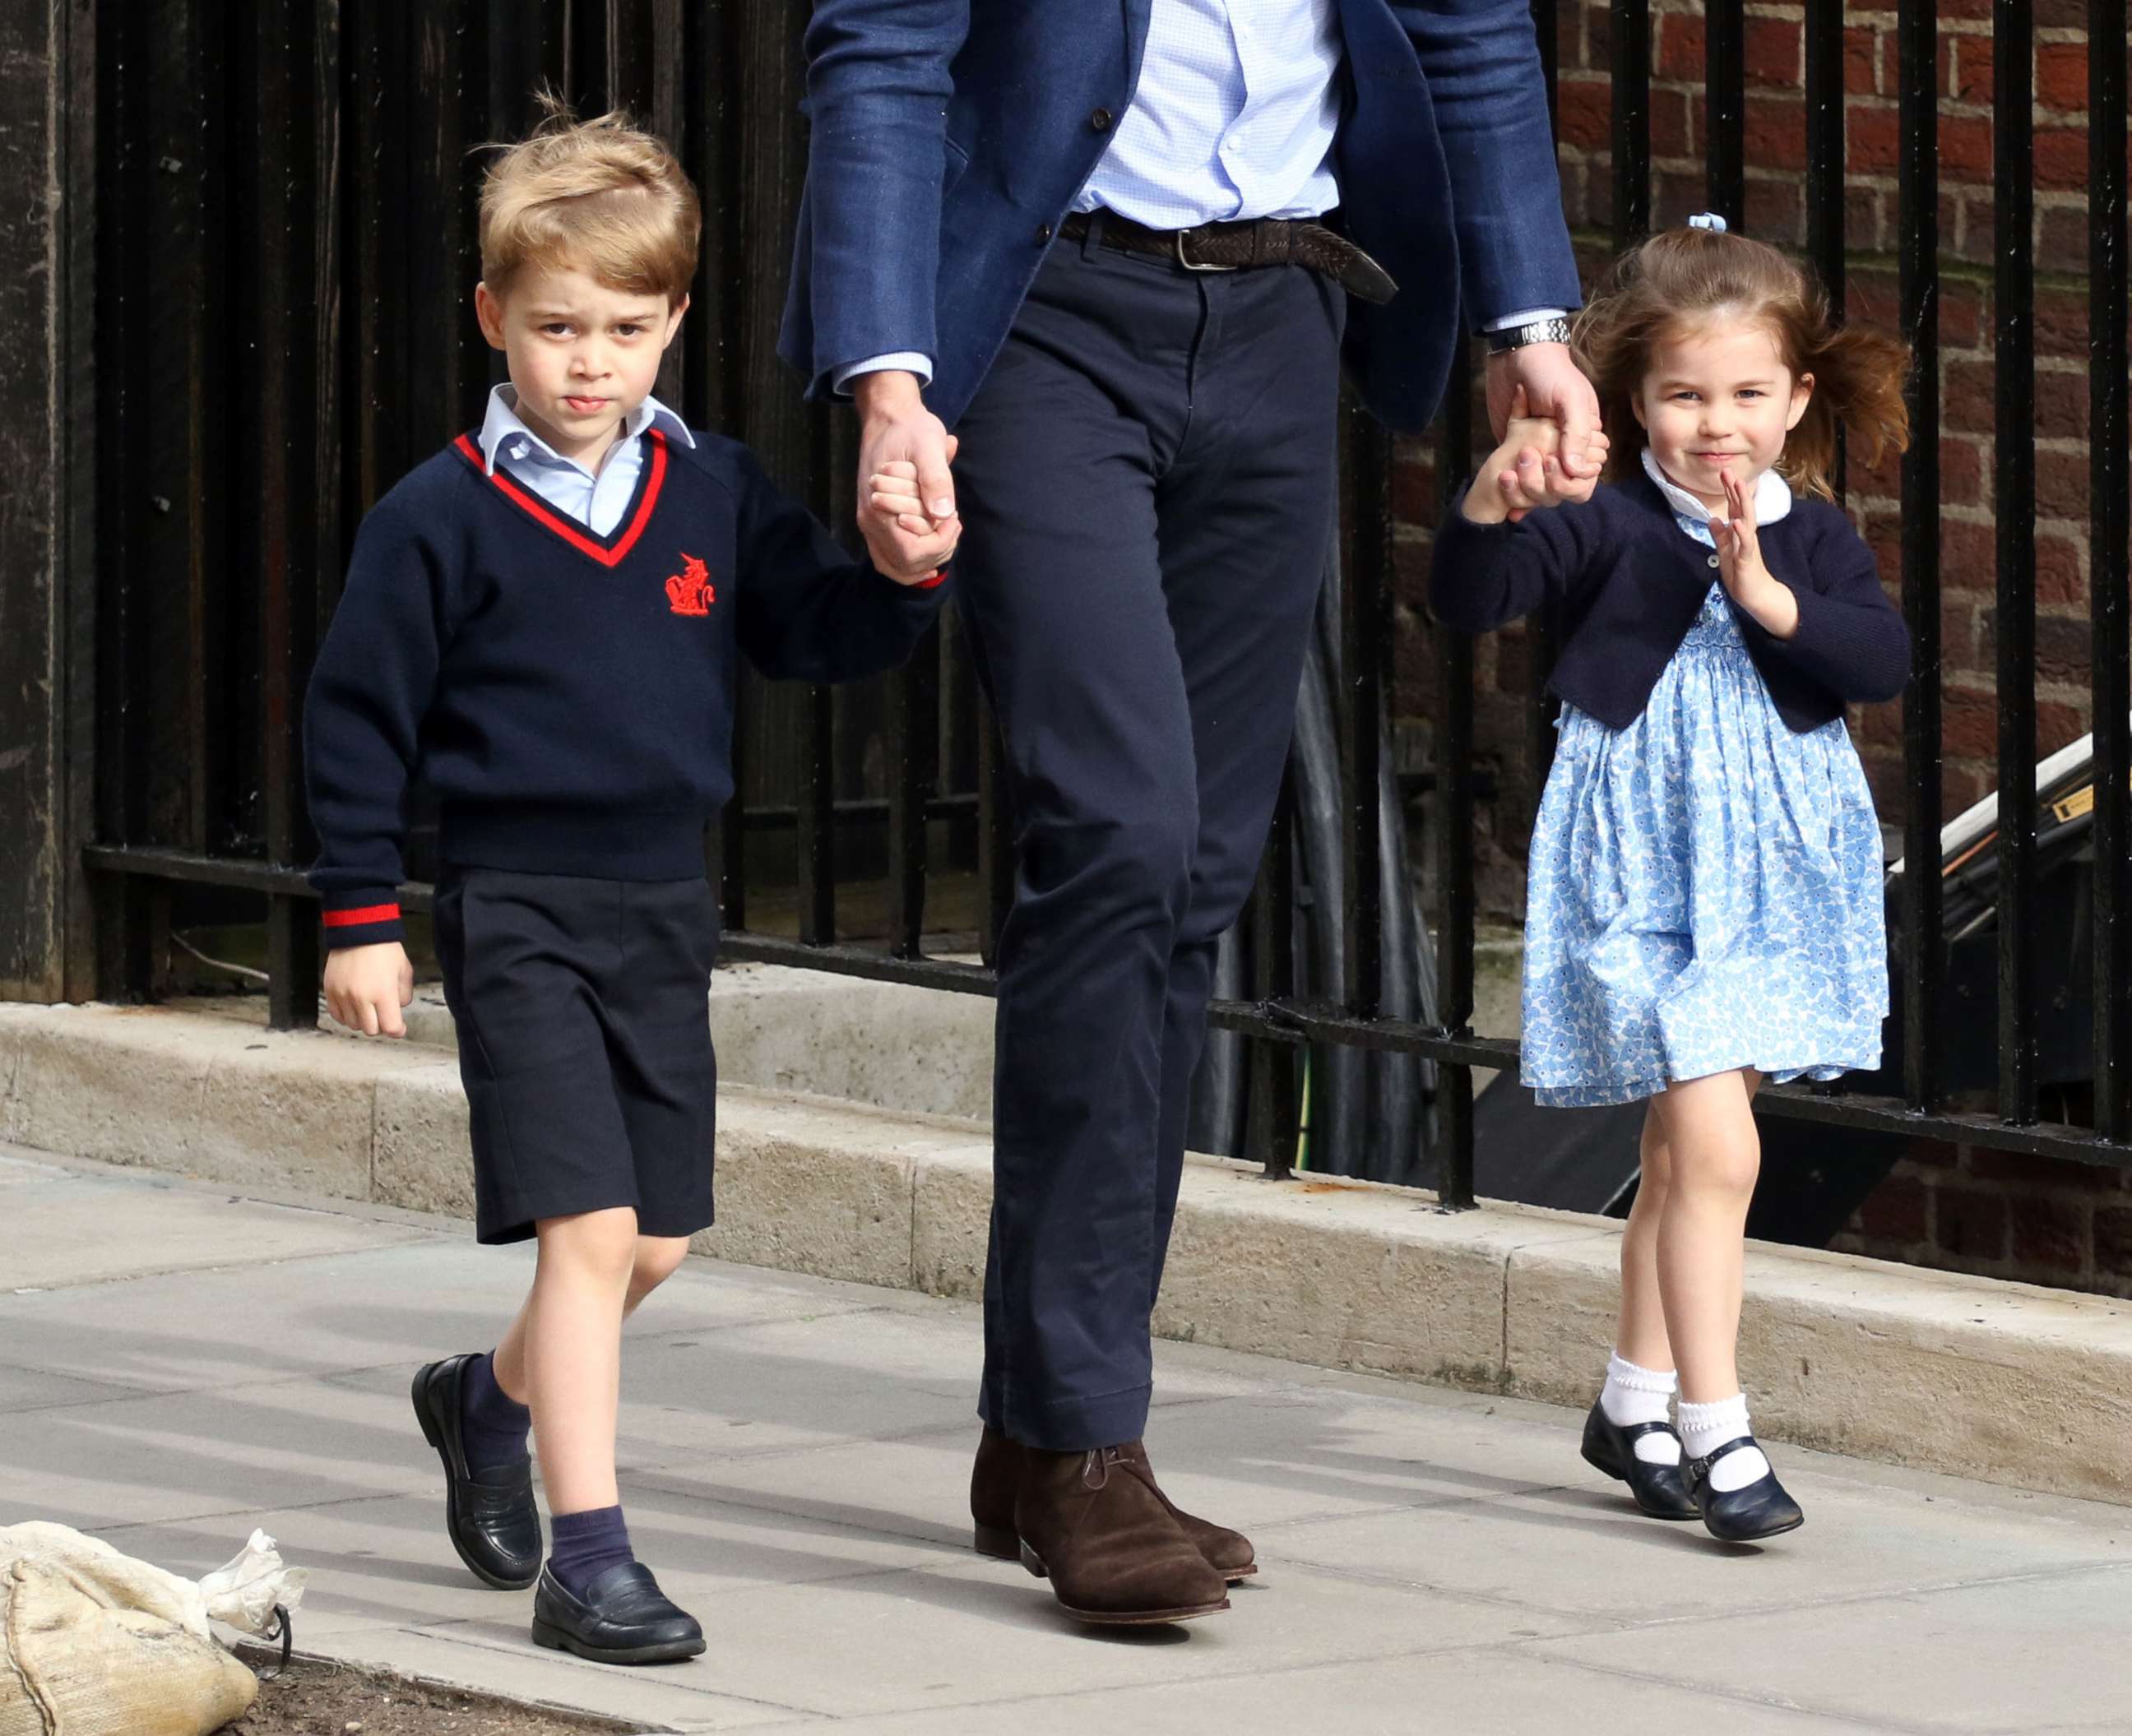 PHOTO: Prince George, Prince William and Princess Charlotte outside the Lindo Wing of St Mary's Hospital, April 23, 2018, in London.